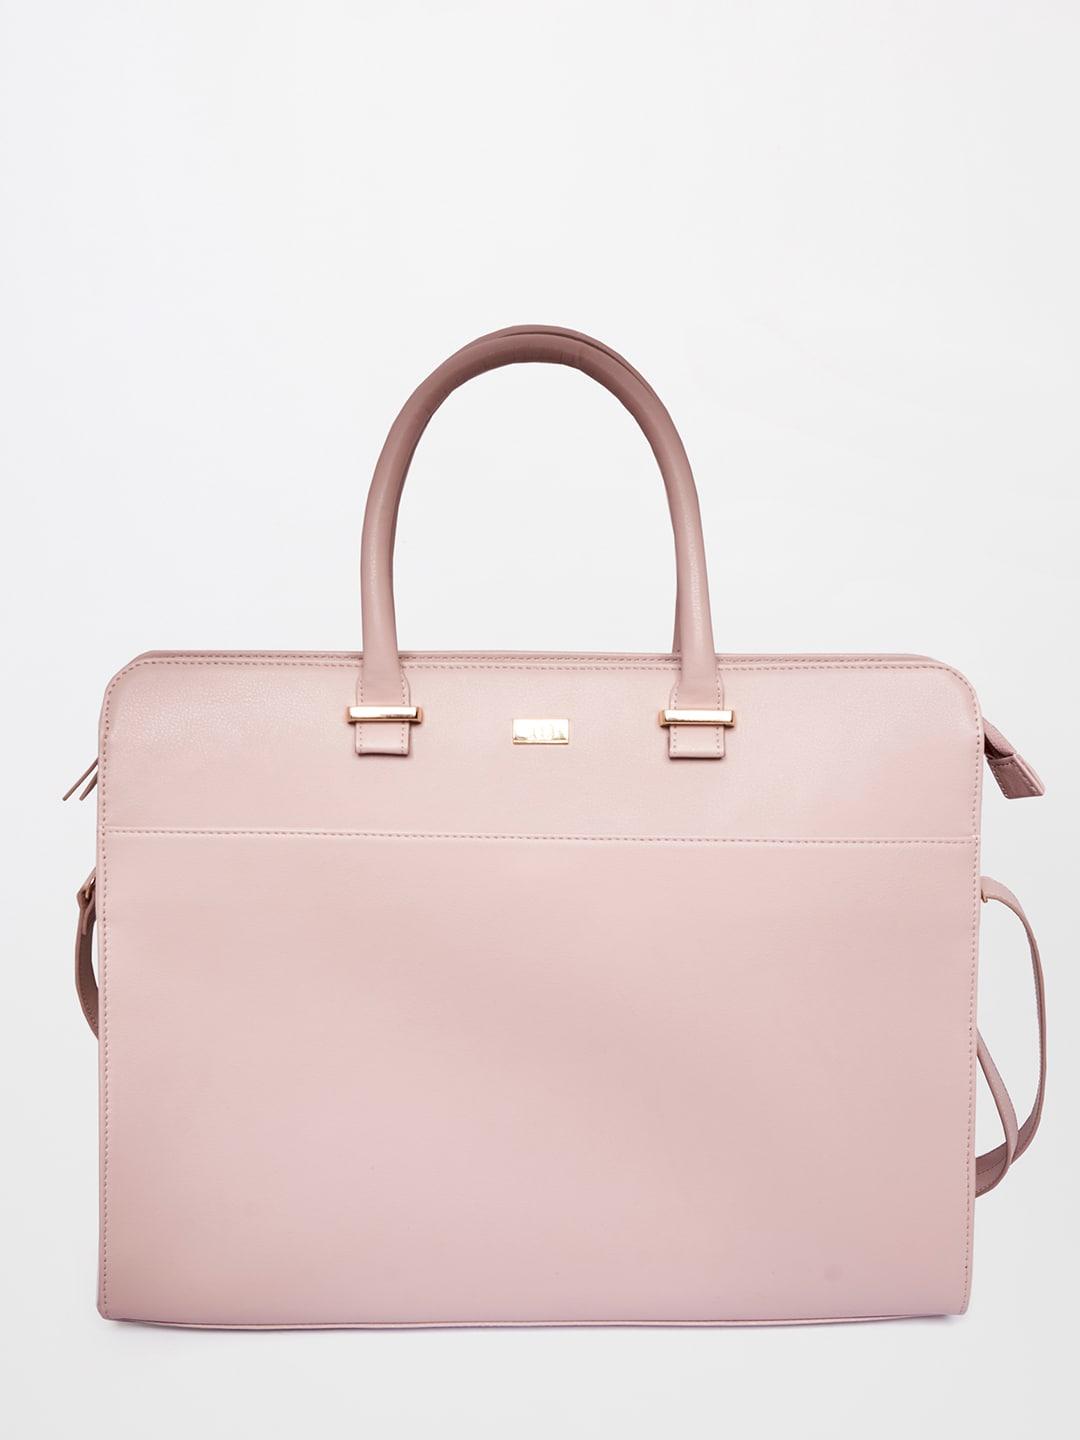 AND Women Pink Oversized Structured Sling Bag